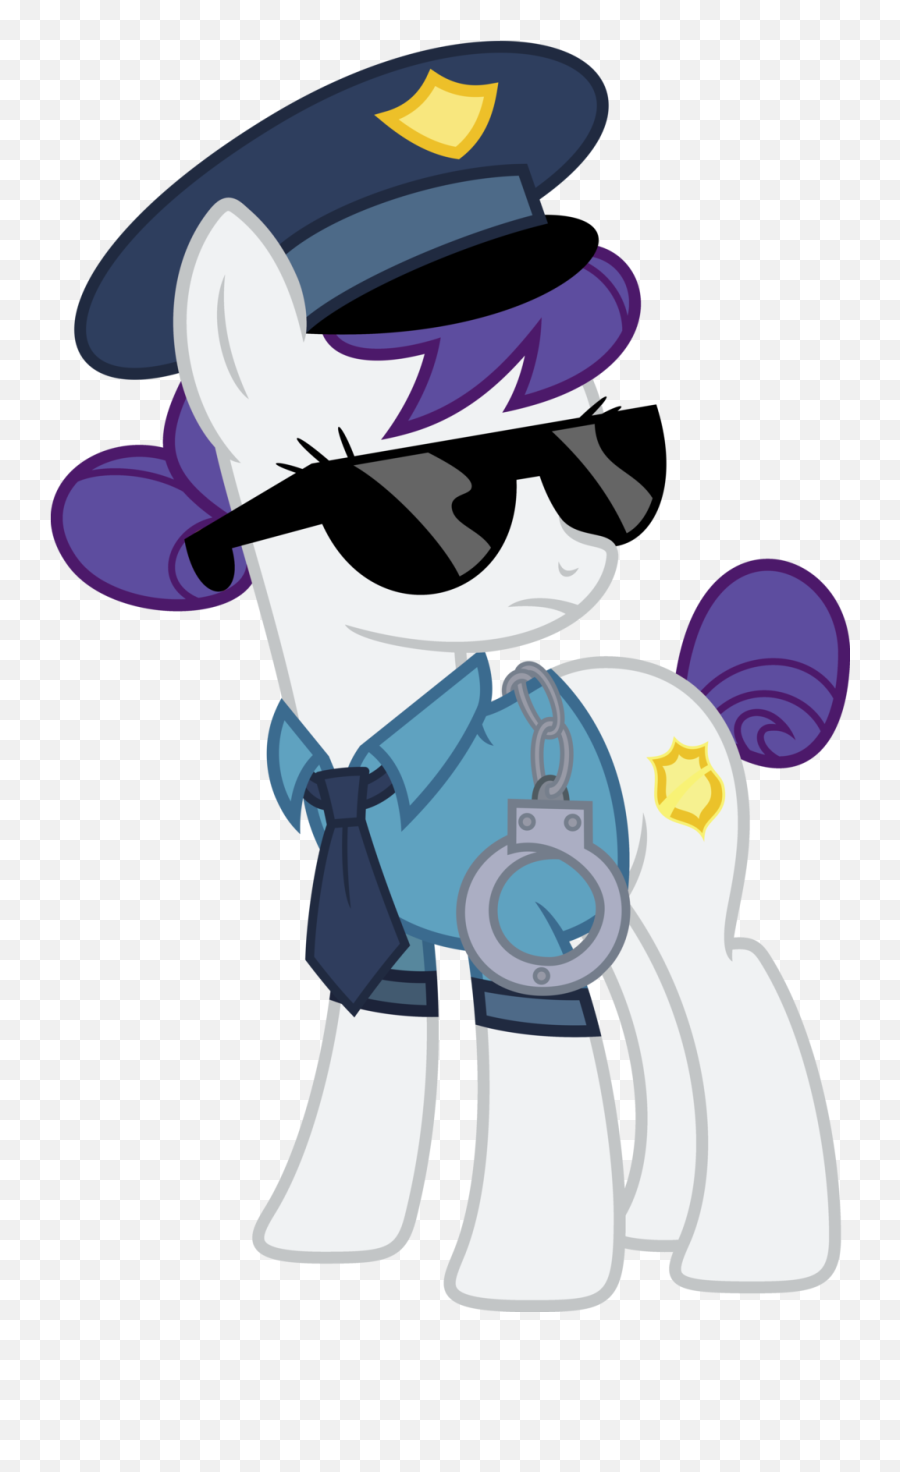 Officer Clipart Fashion Police - Mlp Police Pony Fluttershy Police Emoji,Cop Clipart